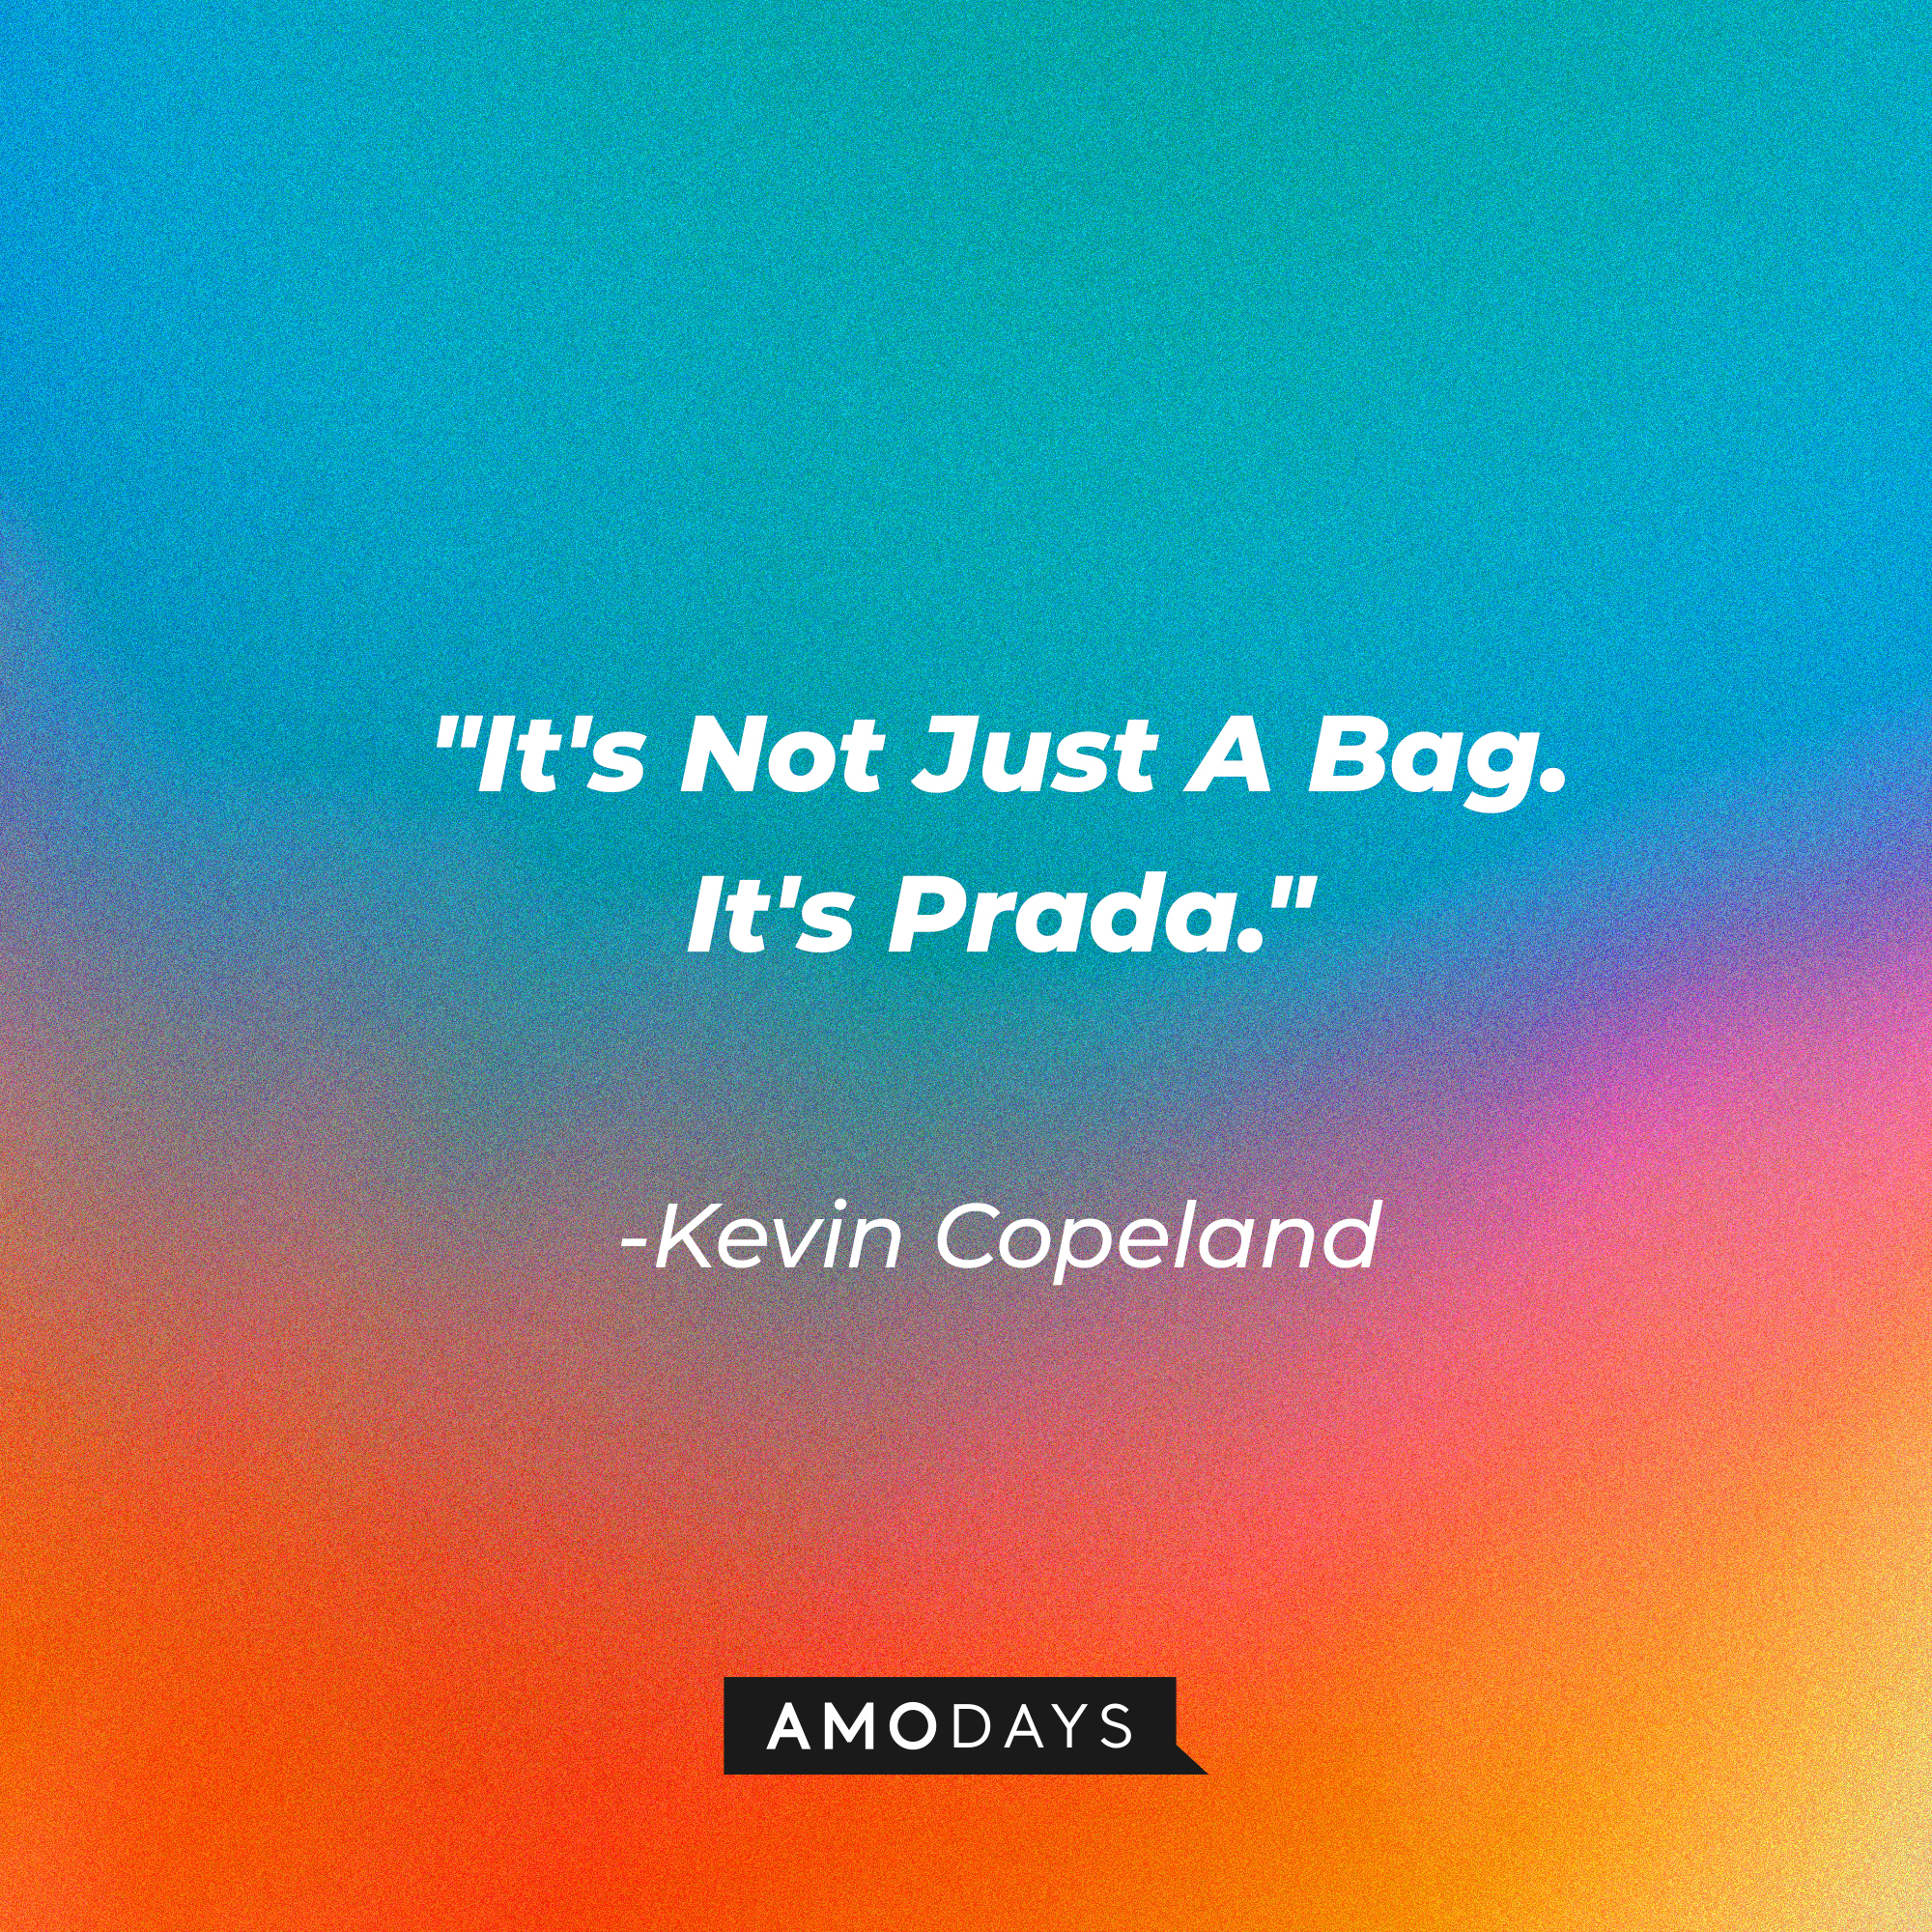 Kevin Copeland's quote: "It's Not Just A Bag. It's Prada." | Source: Amodays